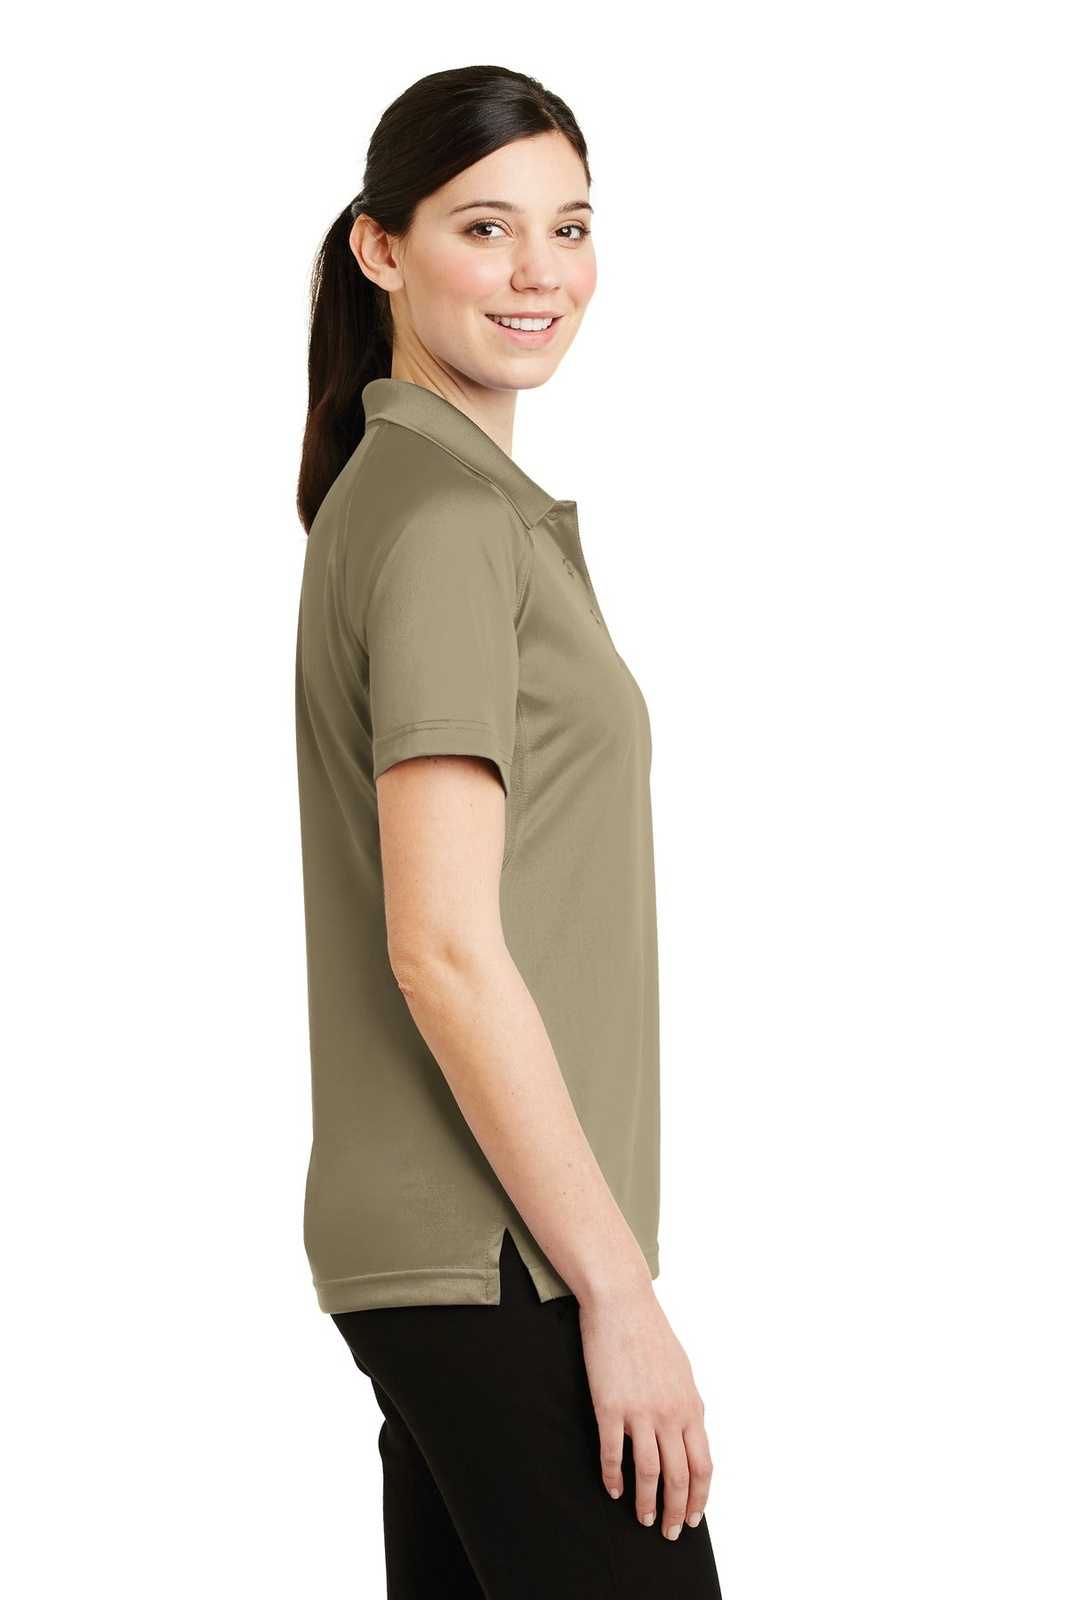 CornerStone CS411 Ladies Select Snag-Proof Tactical Polo - Tan - HIT a Double - 3